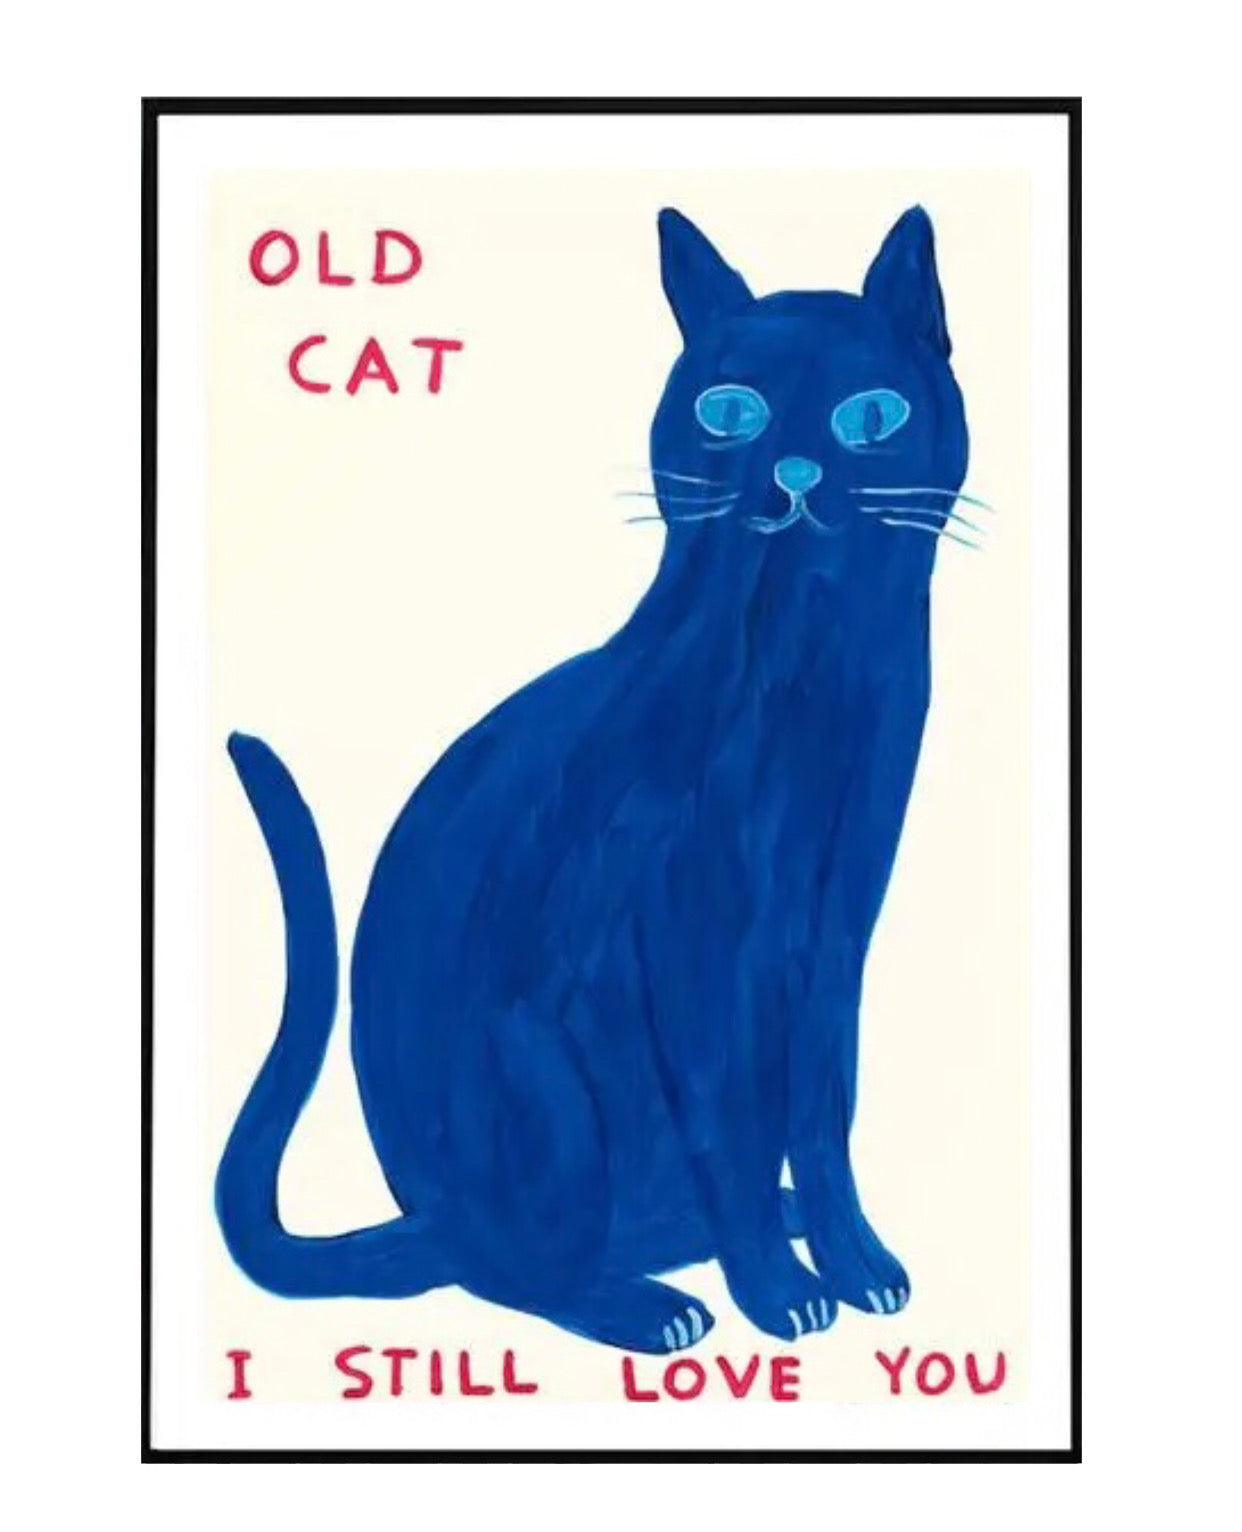 "old cat, i still love you" poster